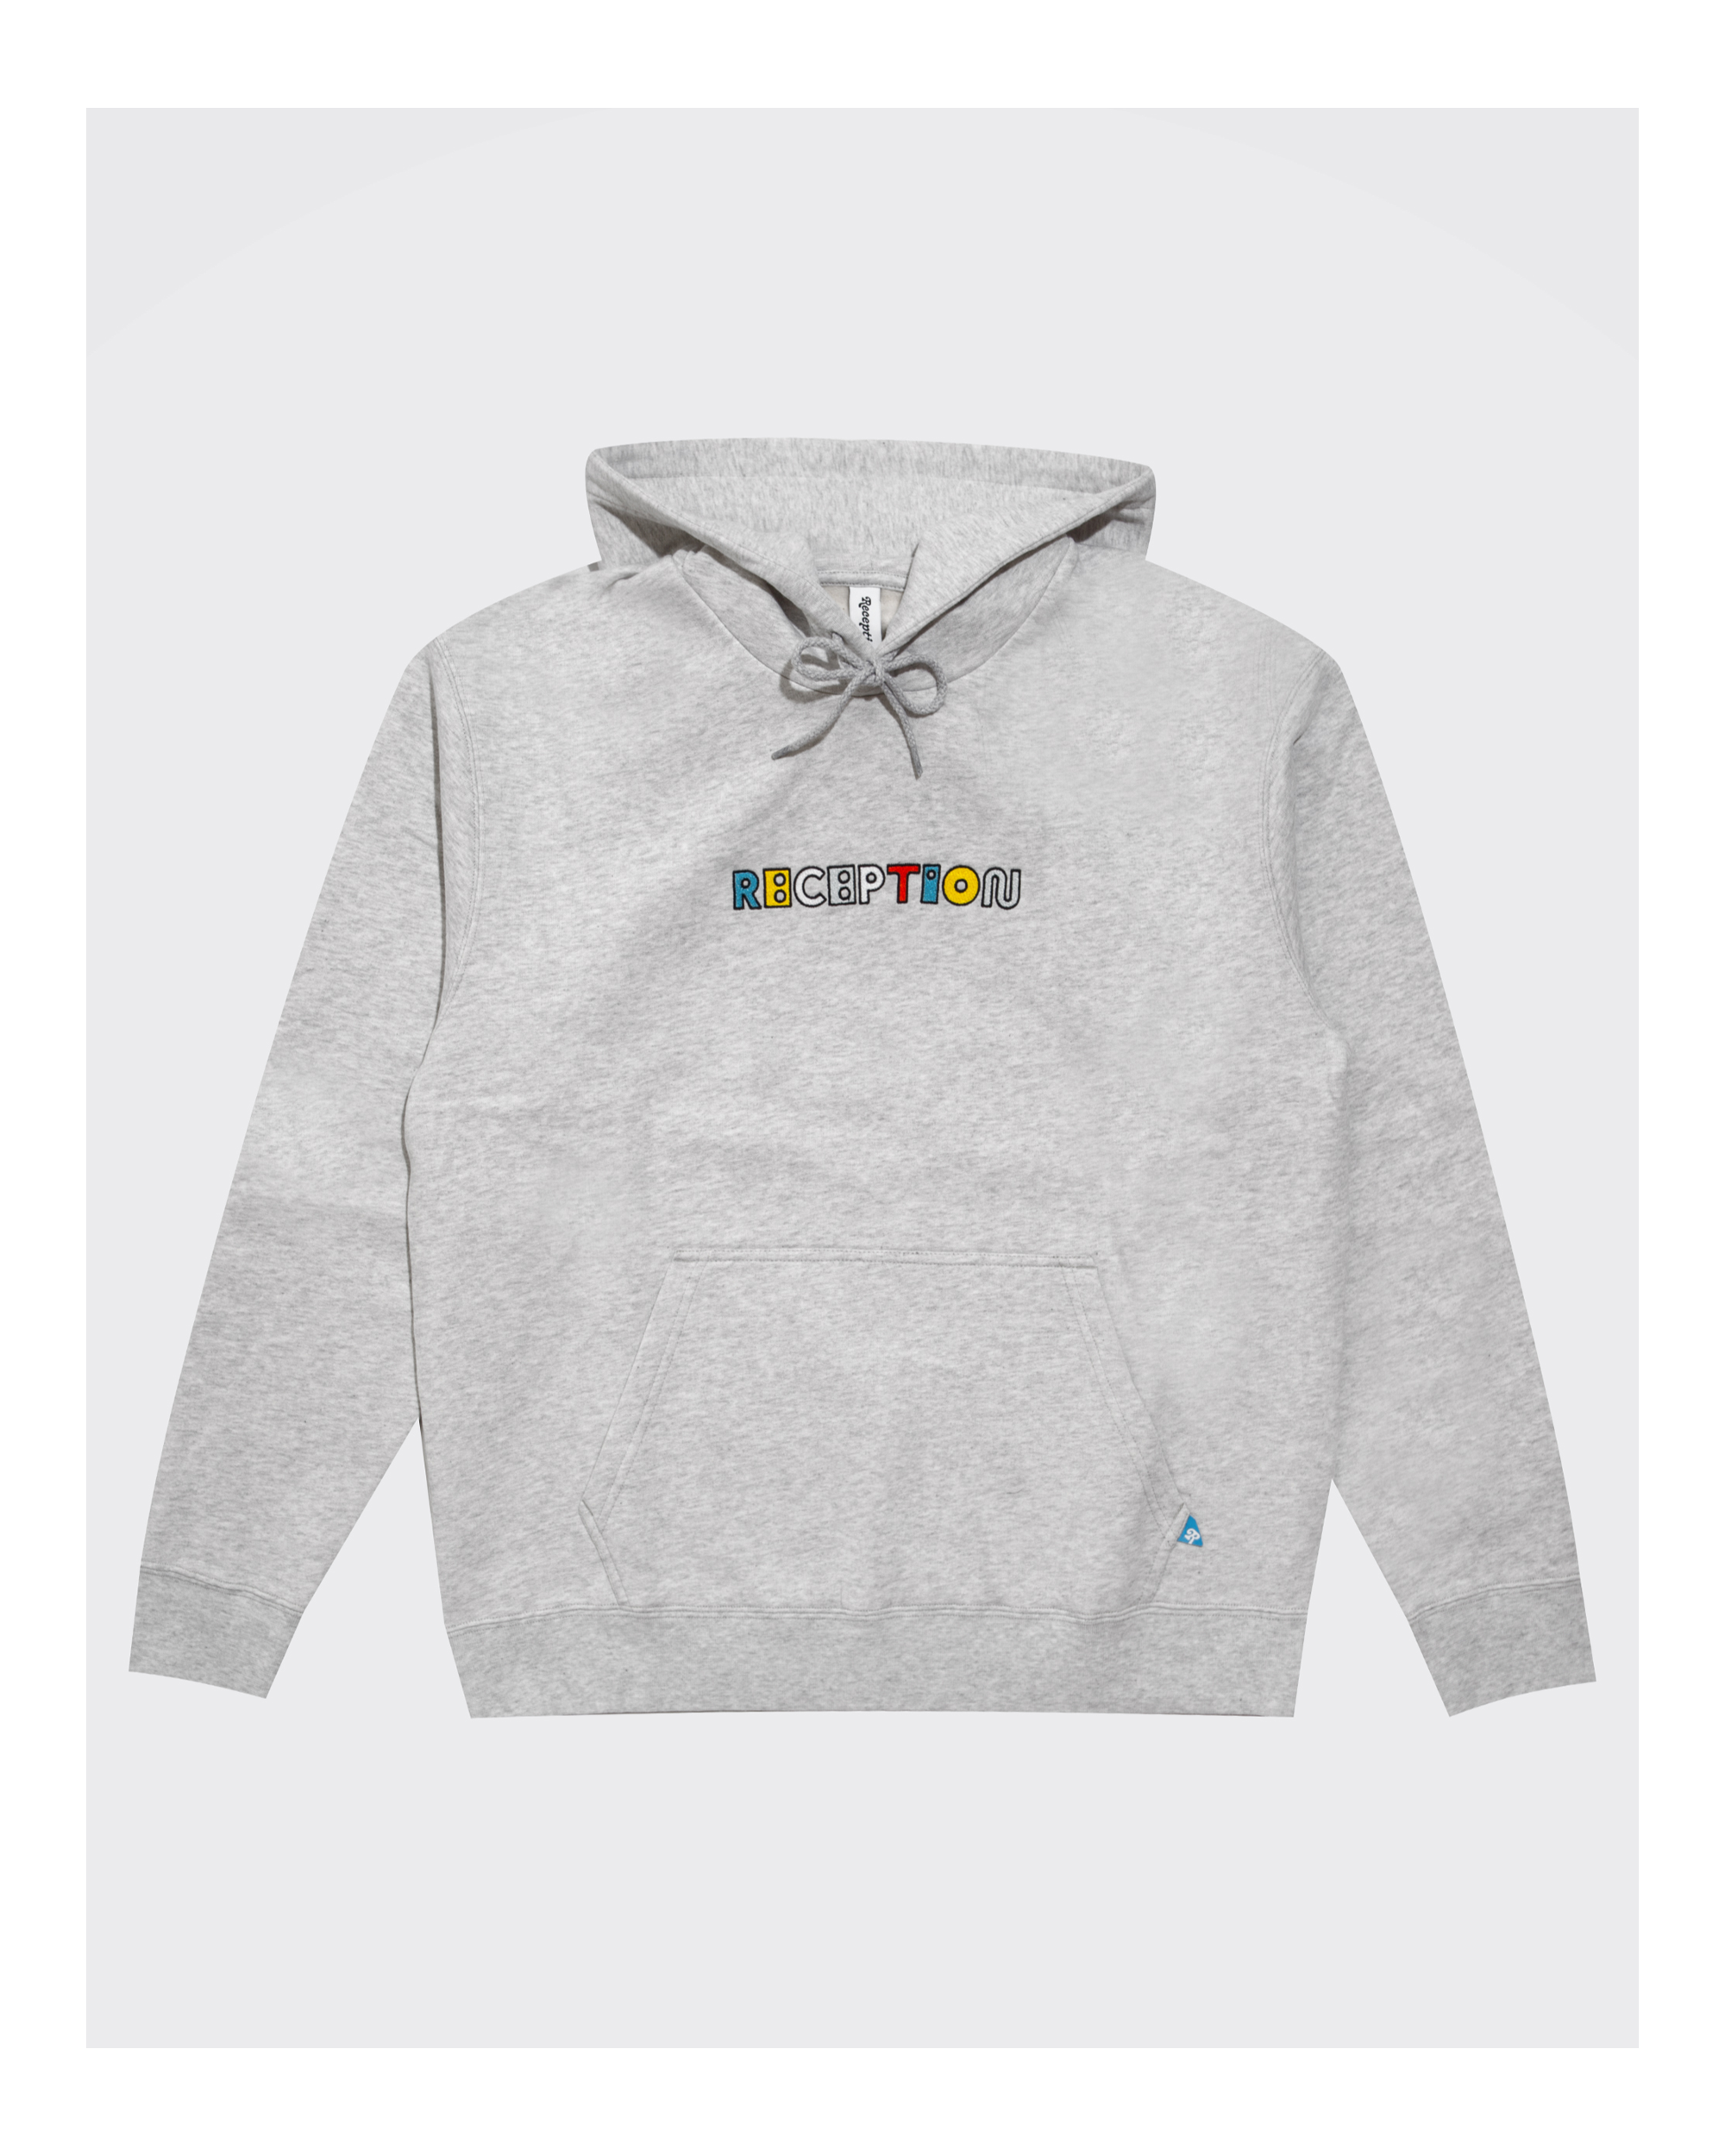 Reception - Sweat - Motto - Hooded Sweat - Athletic Grey